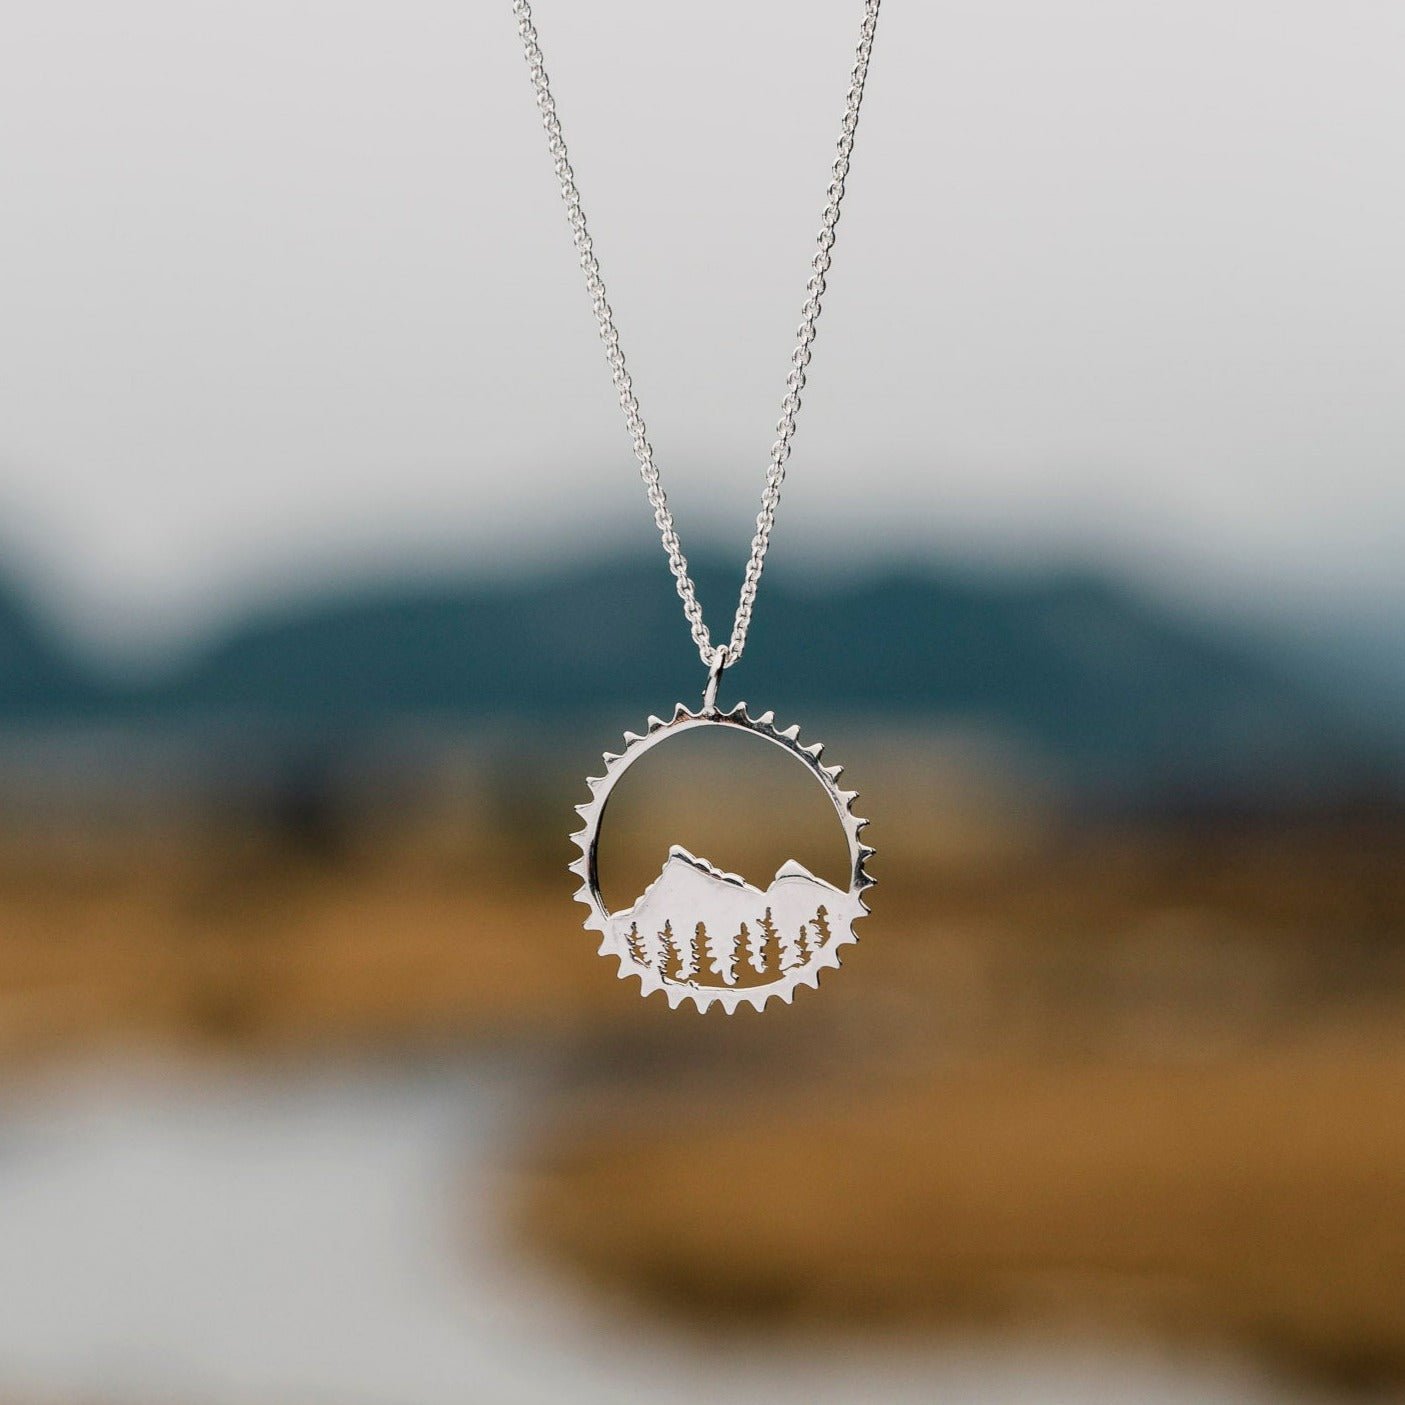 amore pendant necklace shown with blurred blurred river background